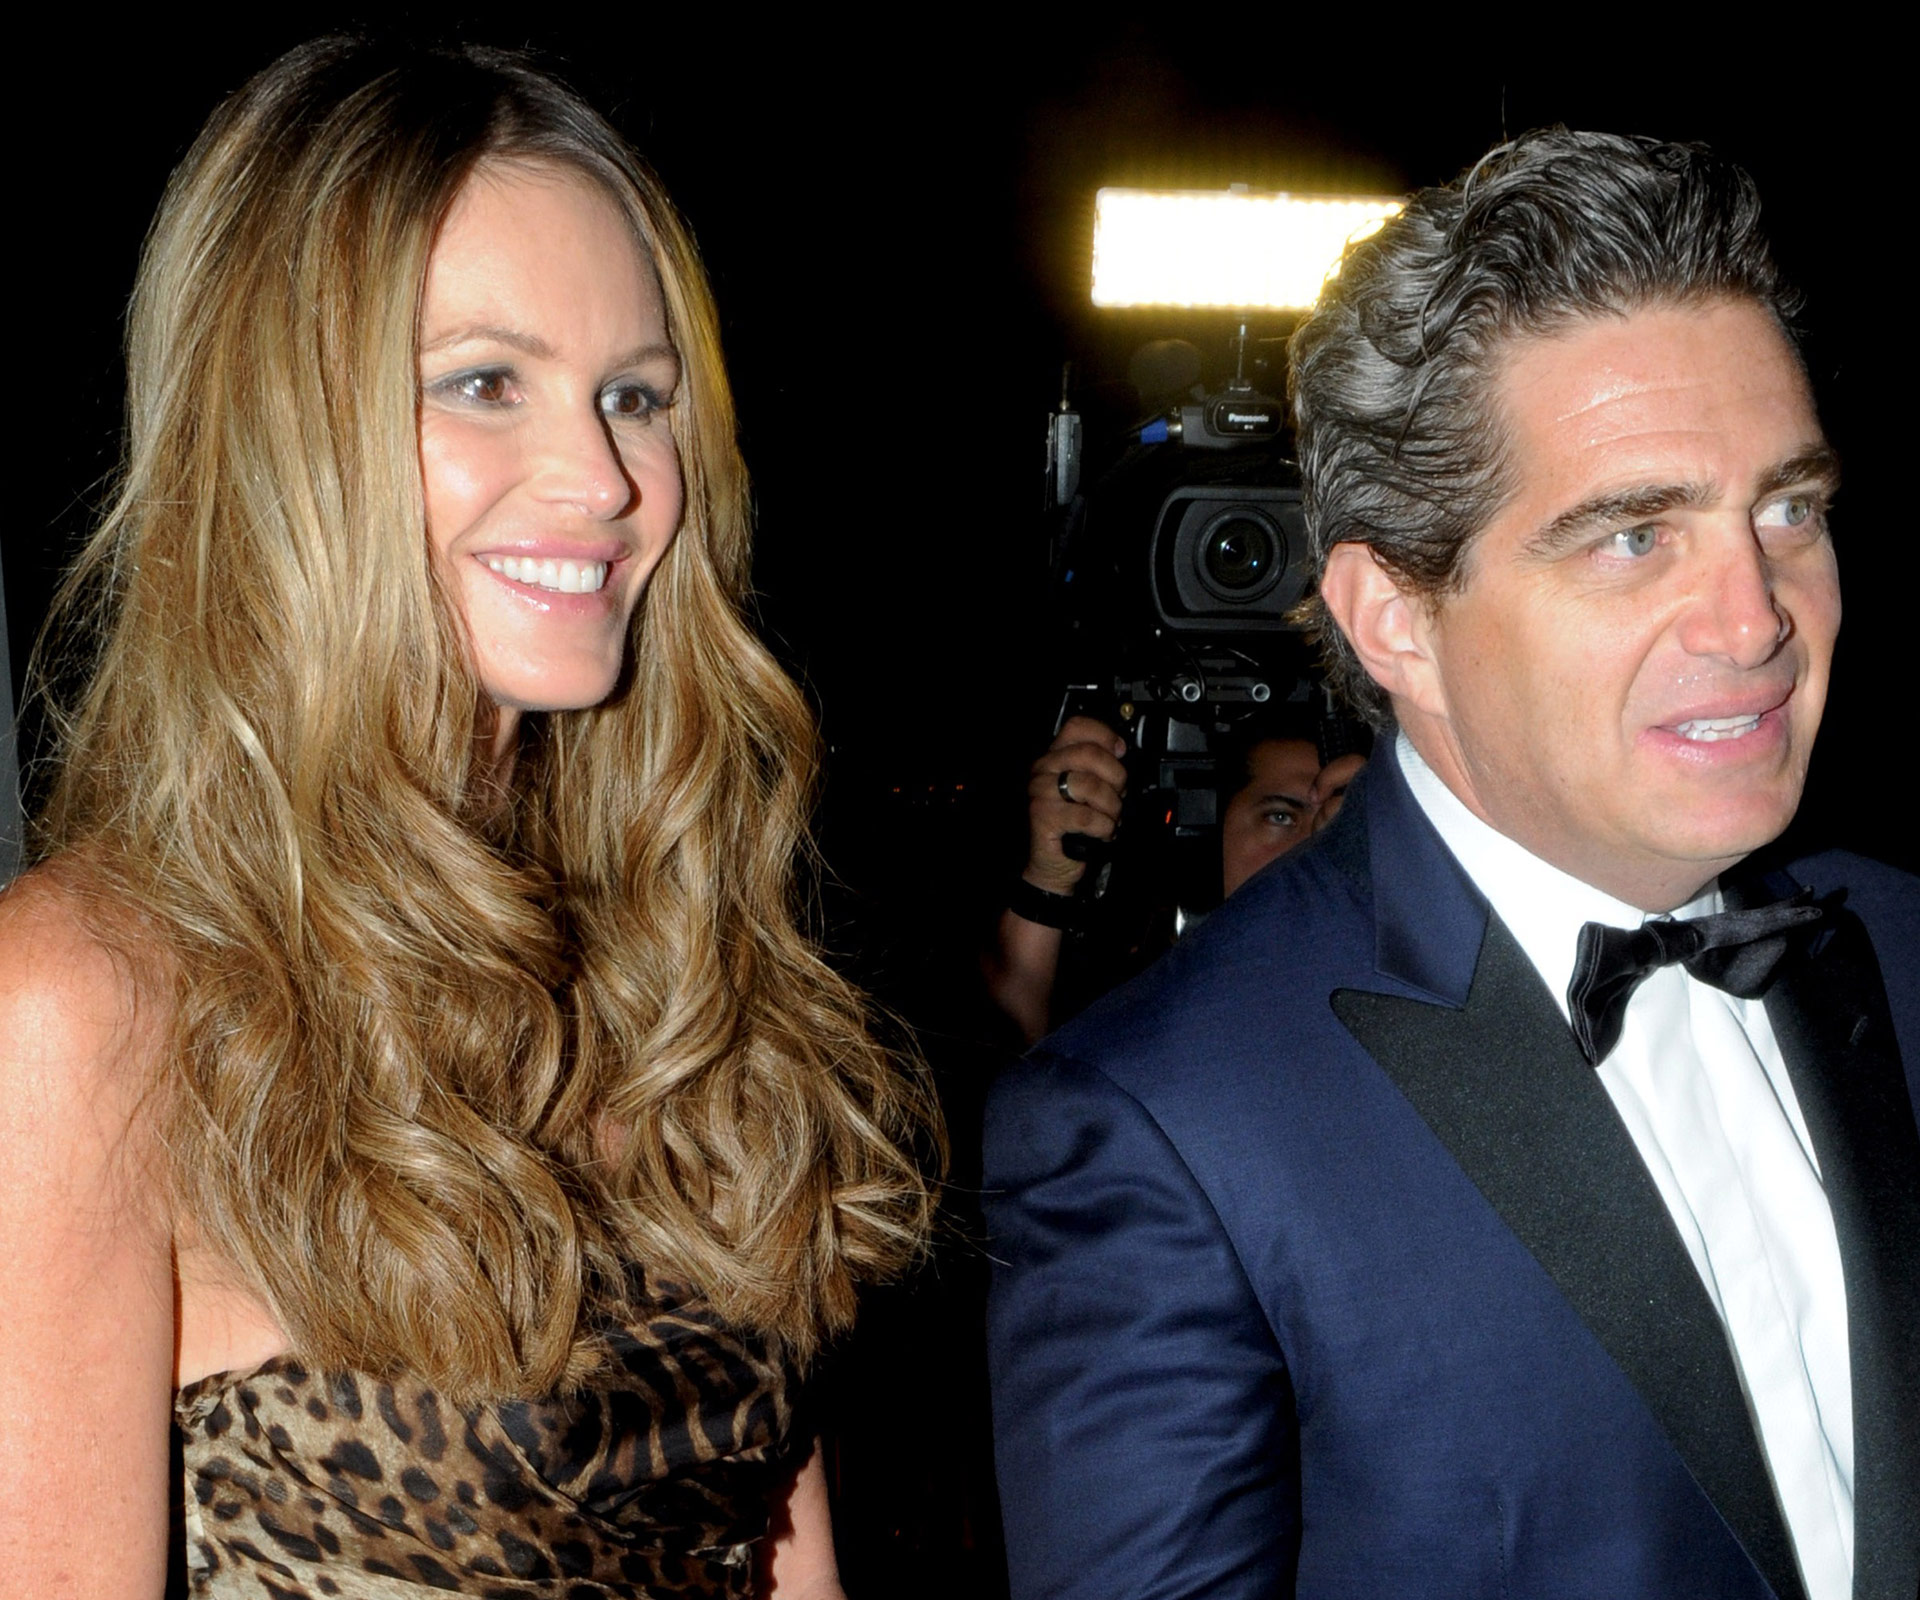 Elle Macpherson and Jeff Soffer